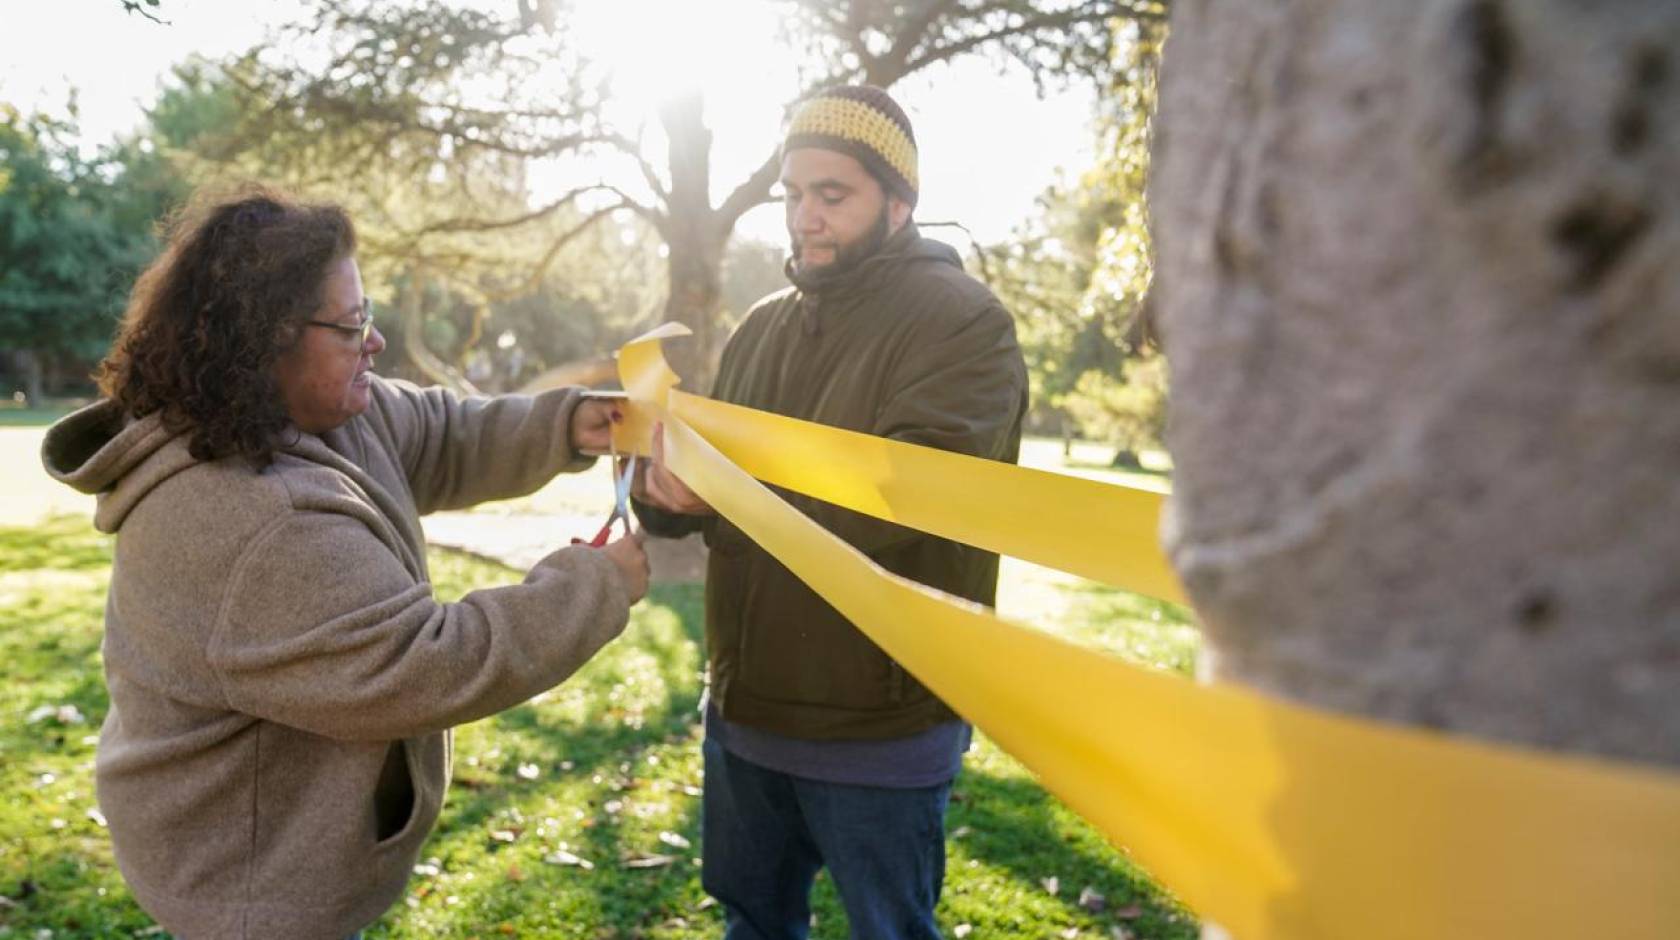 A woman cuts a long yellow ribbon tied to a tree a man is holding